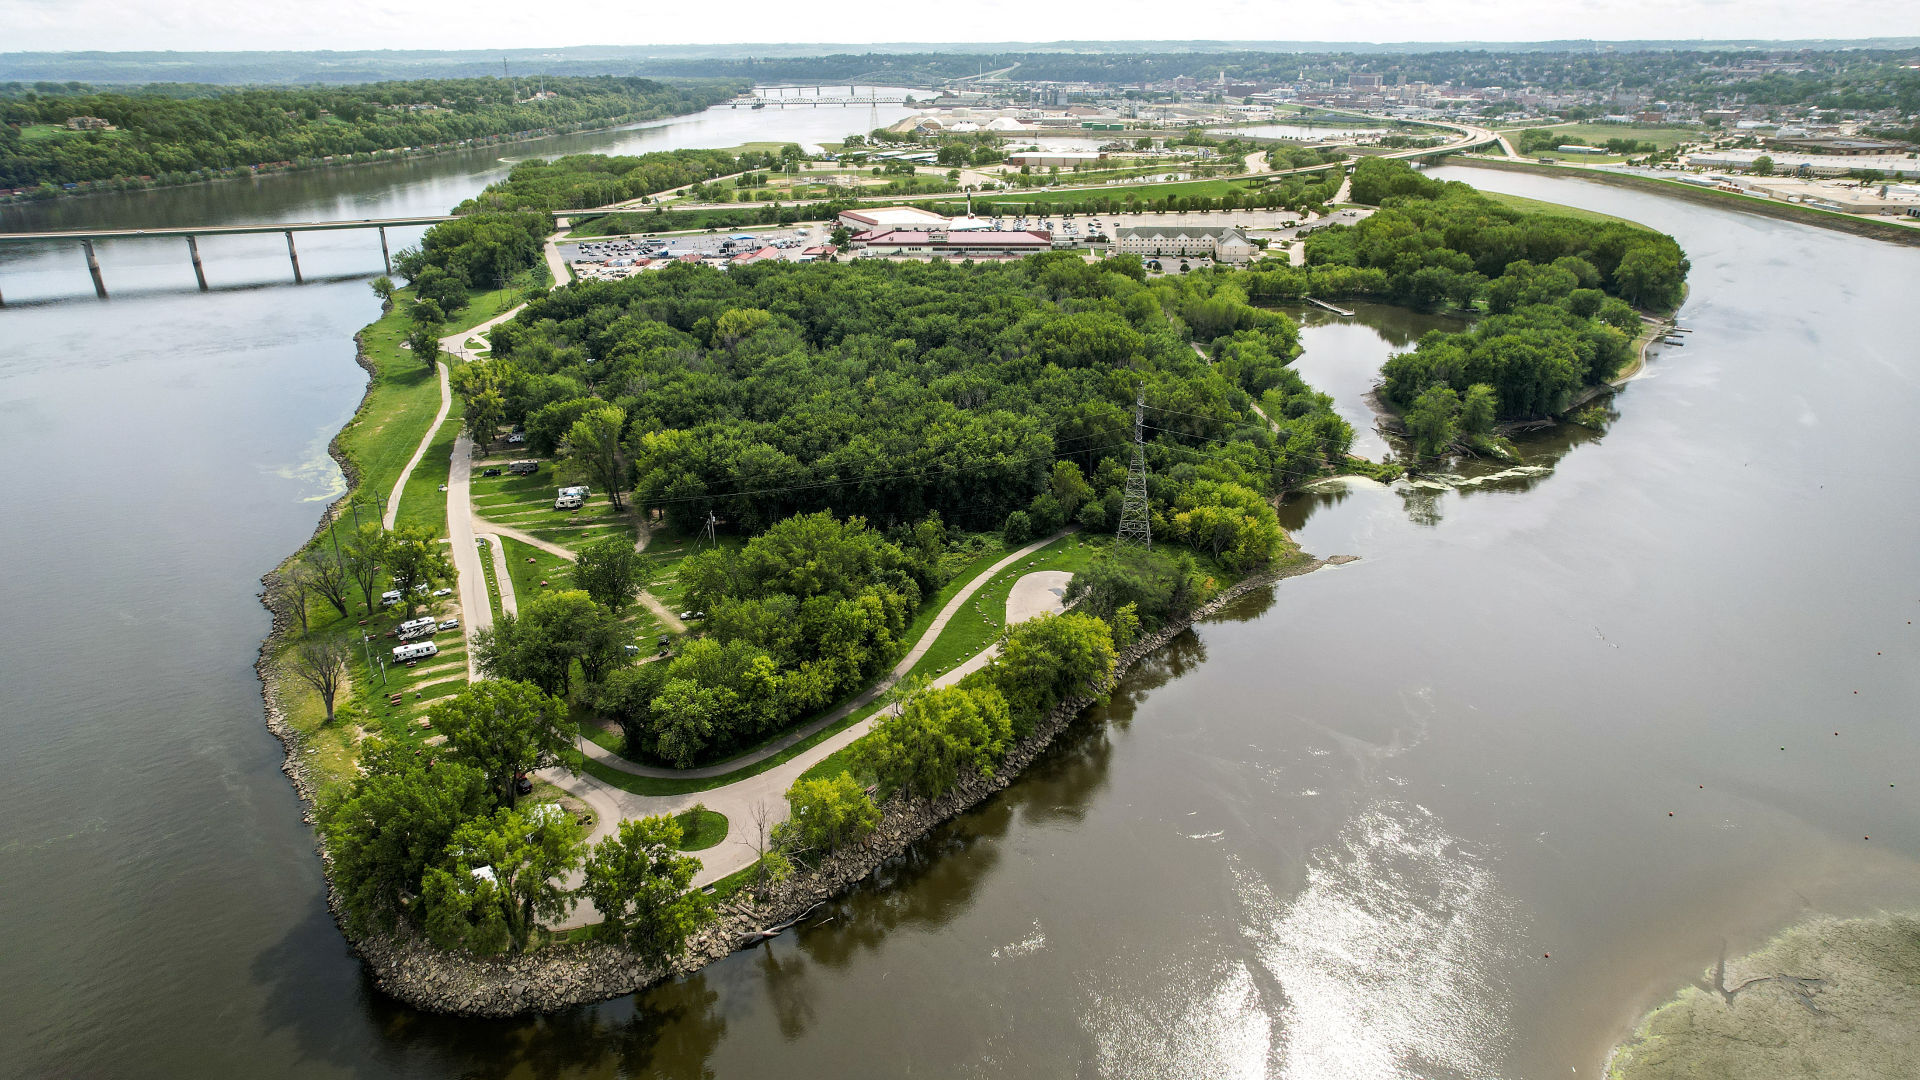 The Dubuque City Council’s approved list of goals and priorities includes a timeline that estimates completing trails on Chaplain Schmitt Island from 16th Street to the veterans memorial by the end of 2022.    PHOTO CREDIT: Dave Kettering